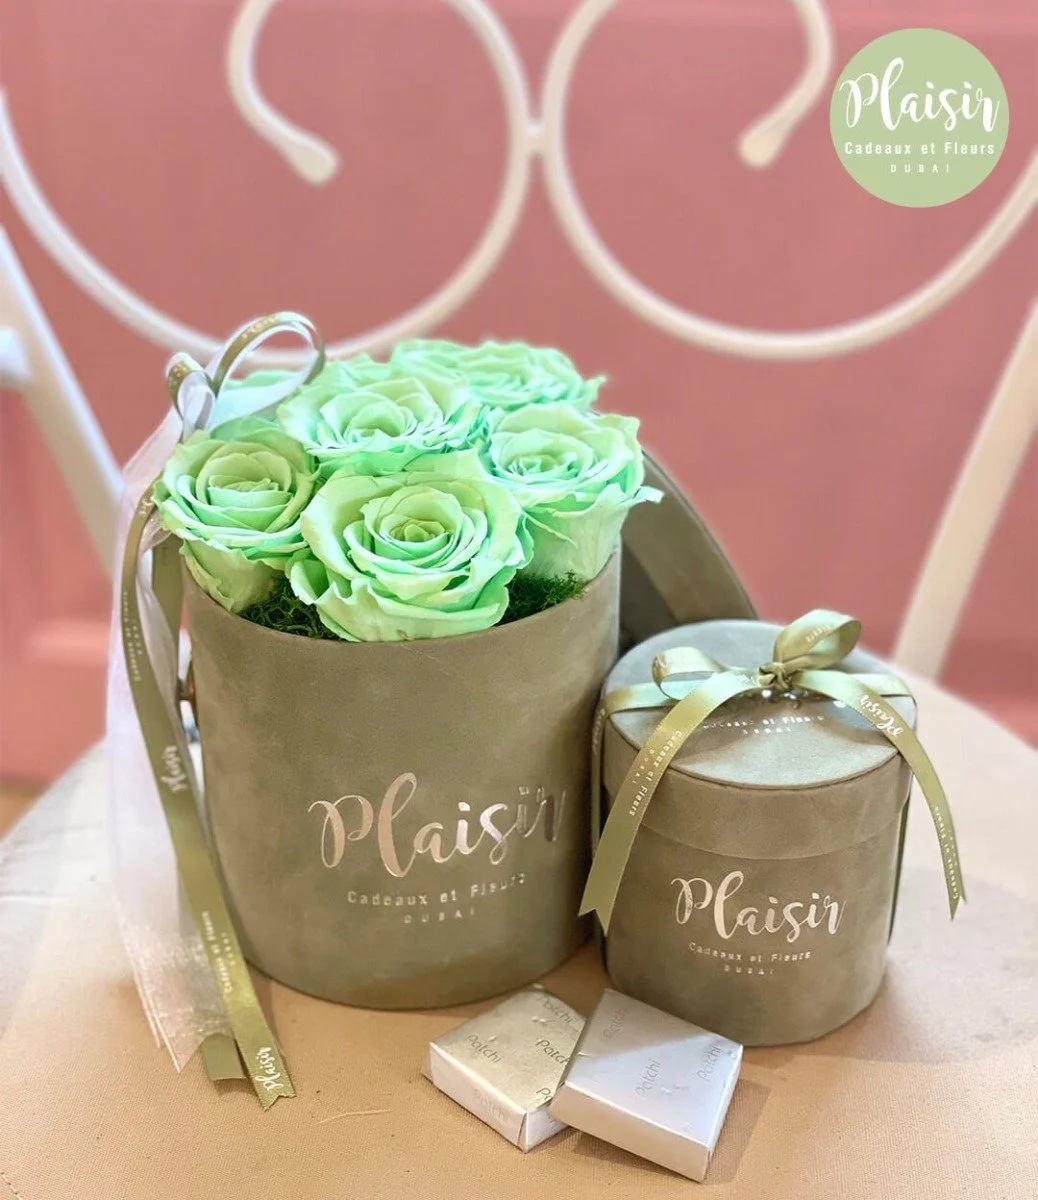 Infinity Rose Cylinder and Patchi Chocolate Giftset in Olive by Plaisir